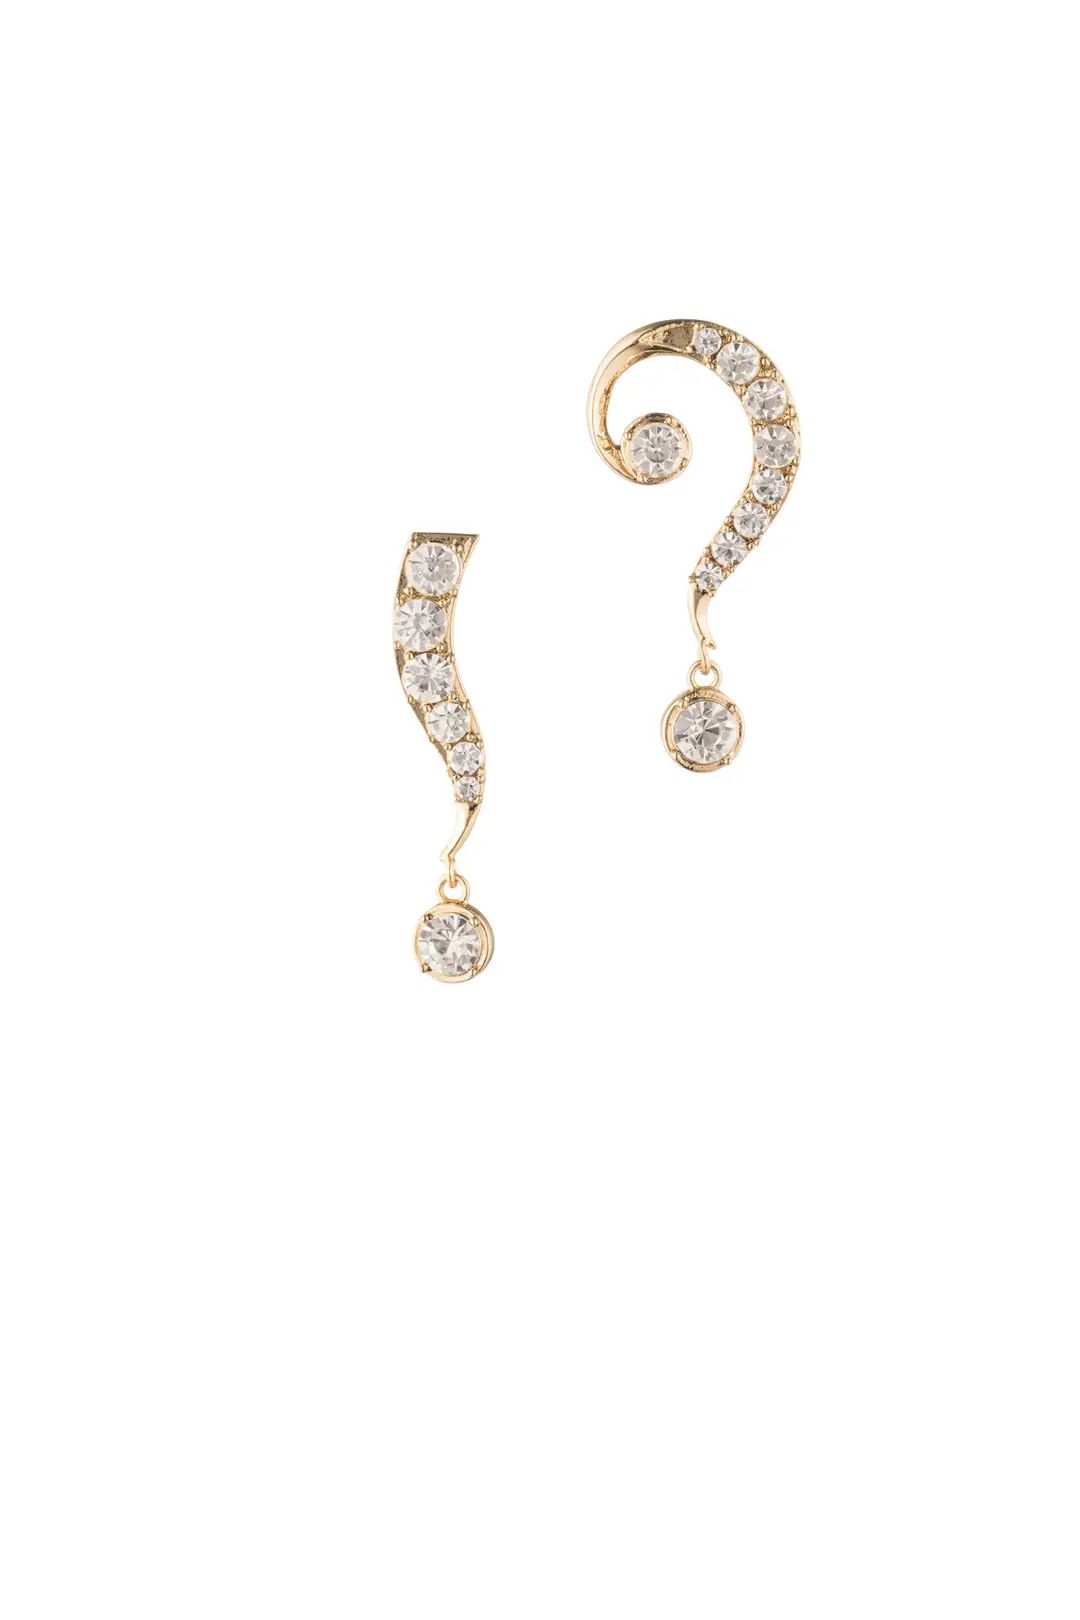 Lulu Frost Question Exclamation Mark Studs | Rent The Runway